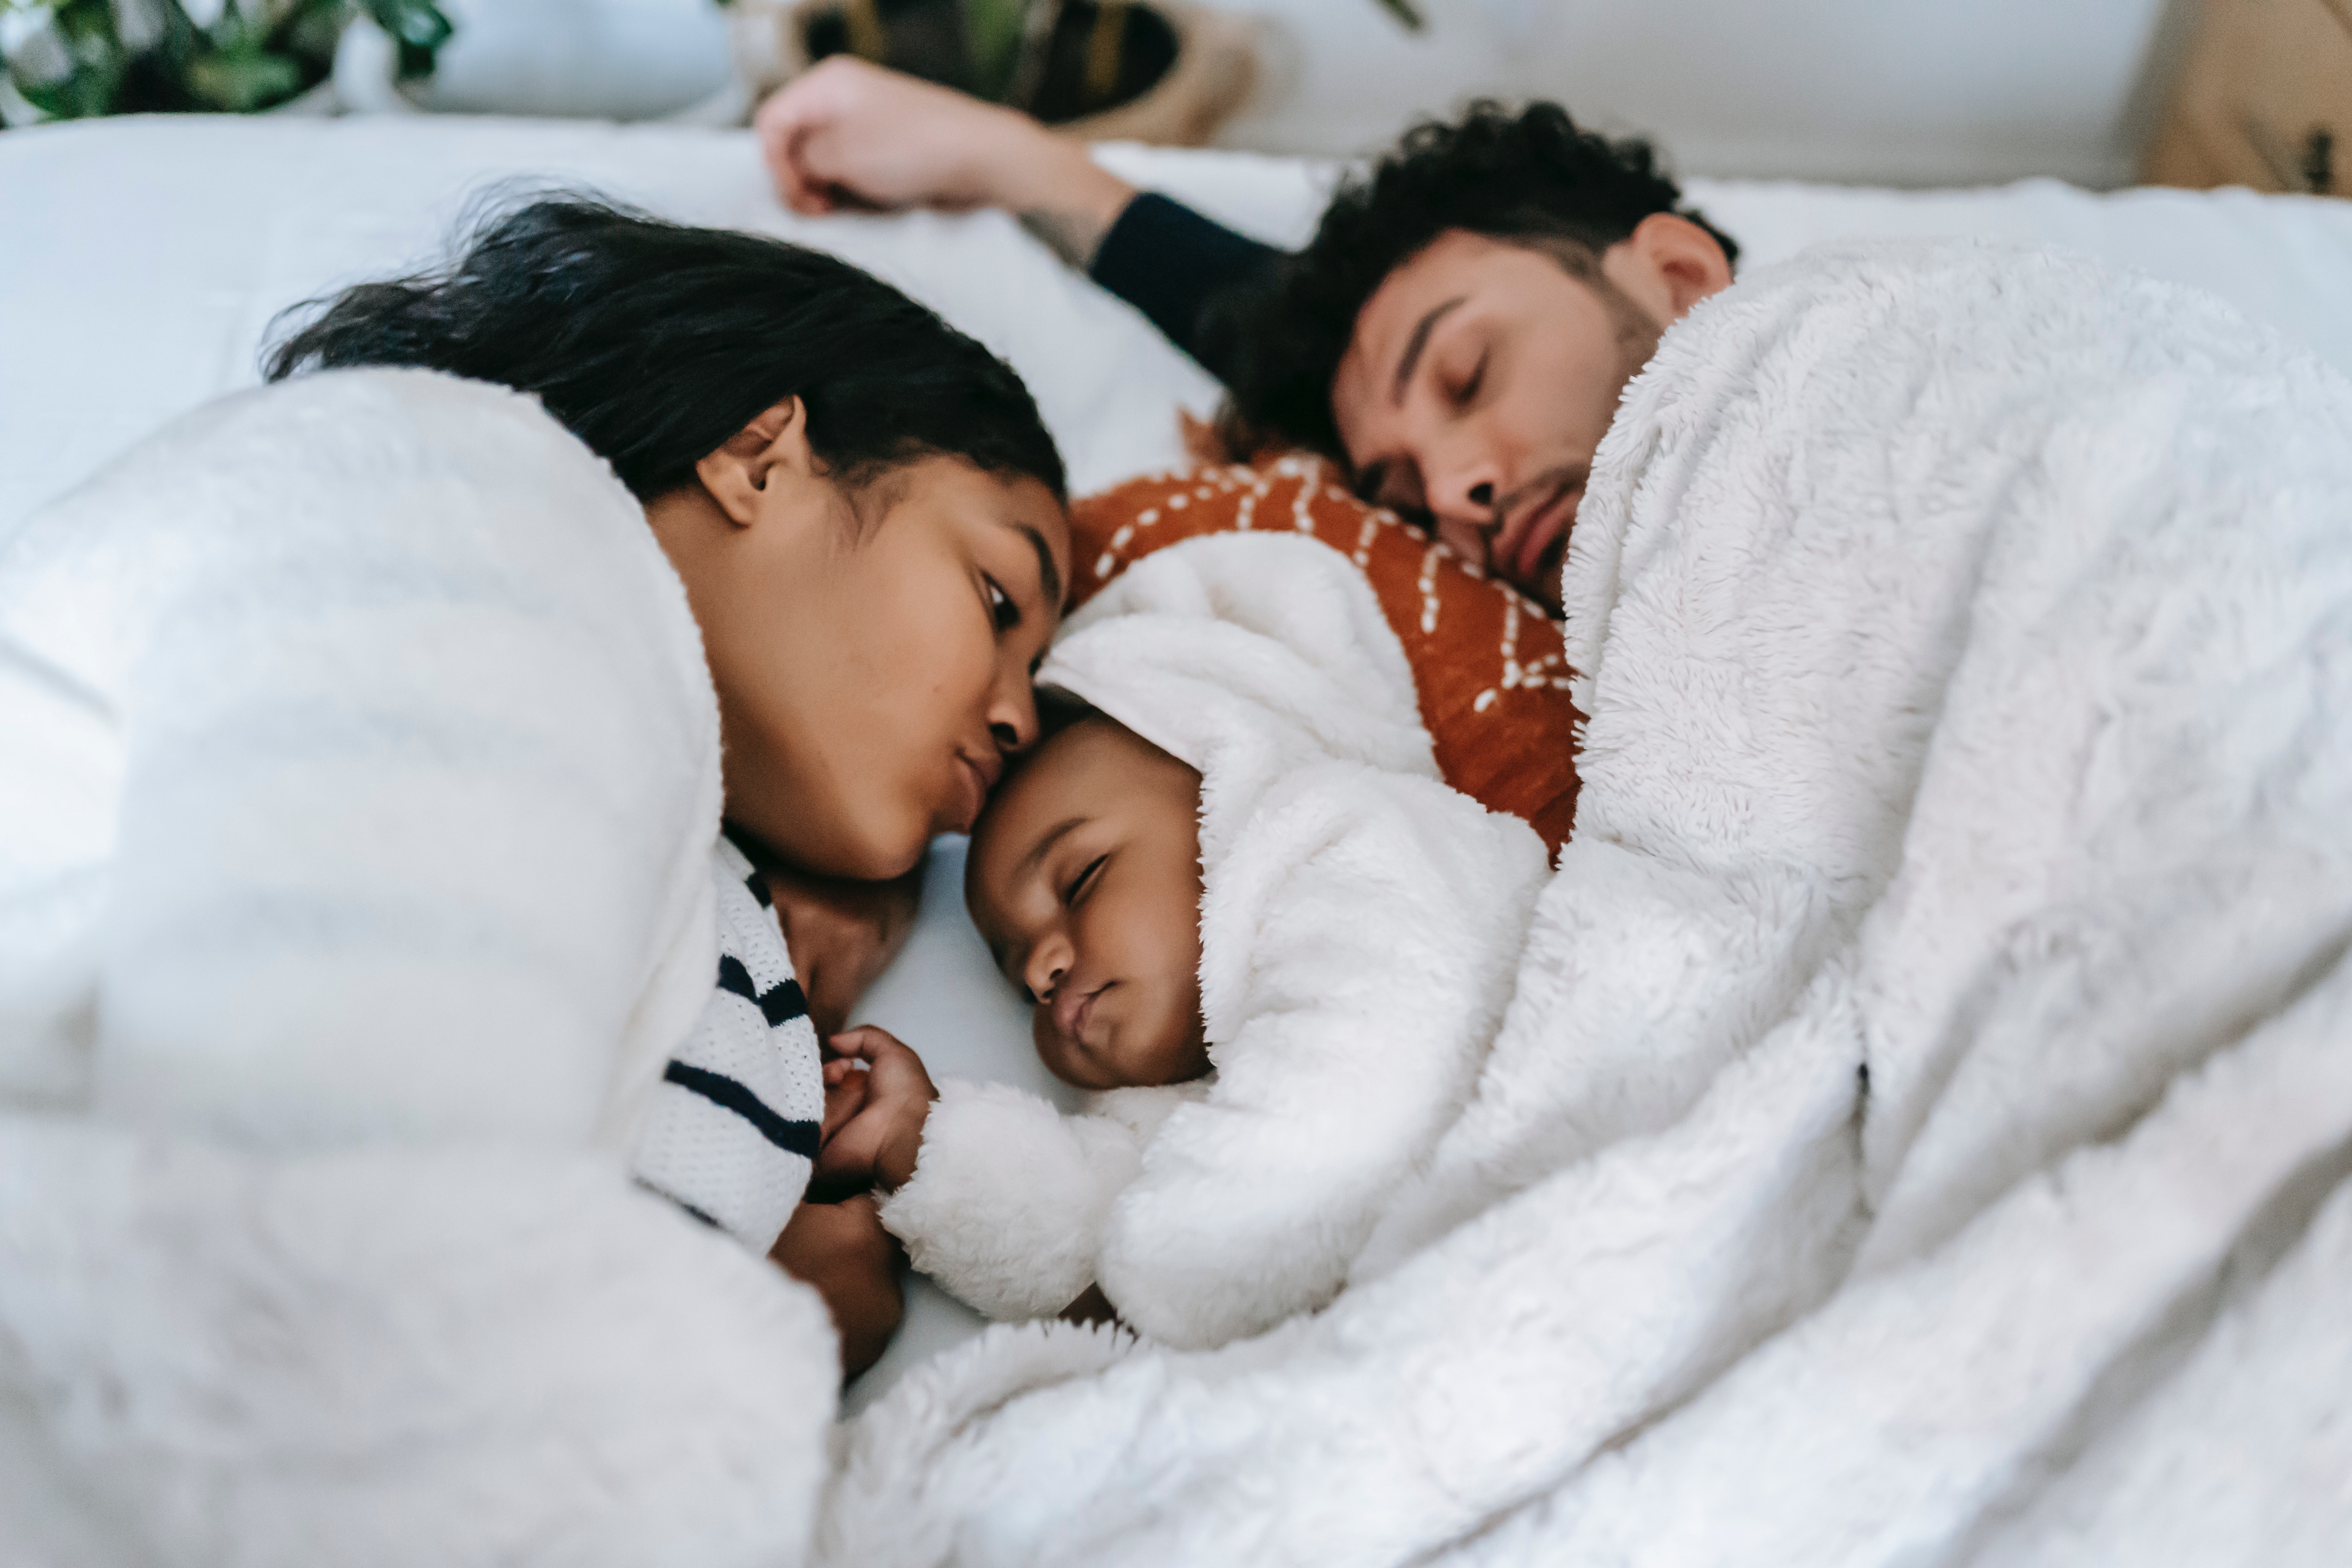 A mixed gender couple cuddles together with a baby in between them on a bed, sharing a white blanket.